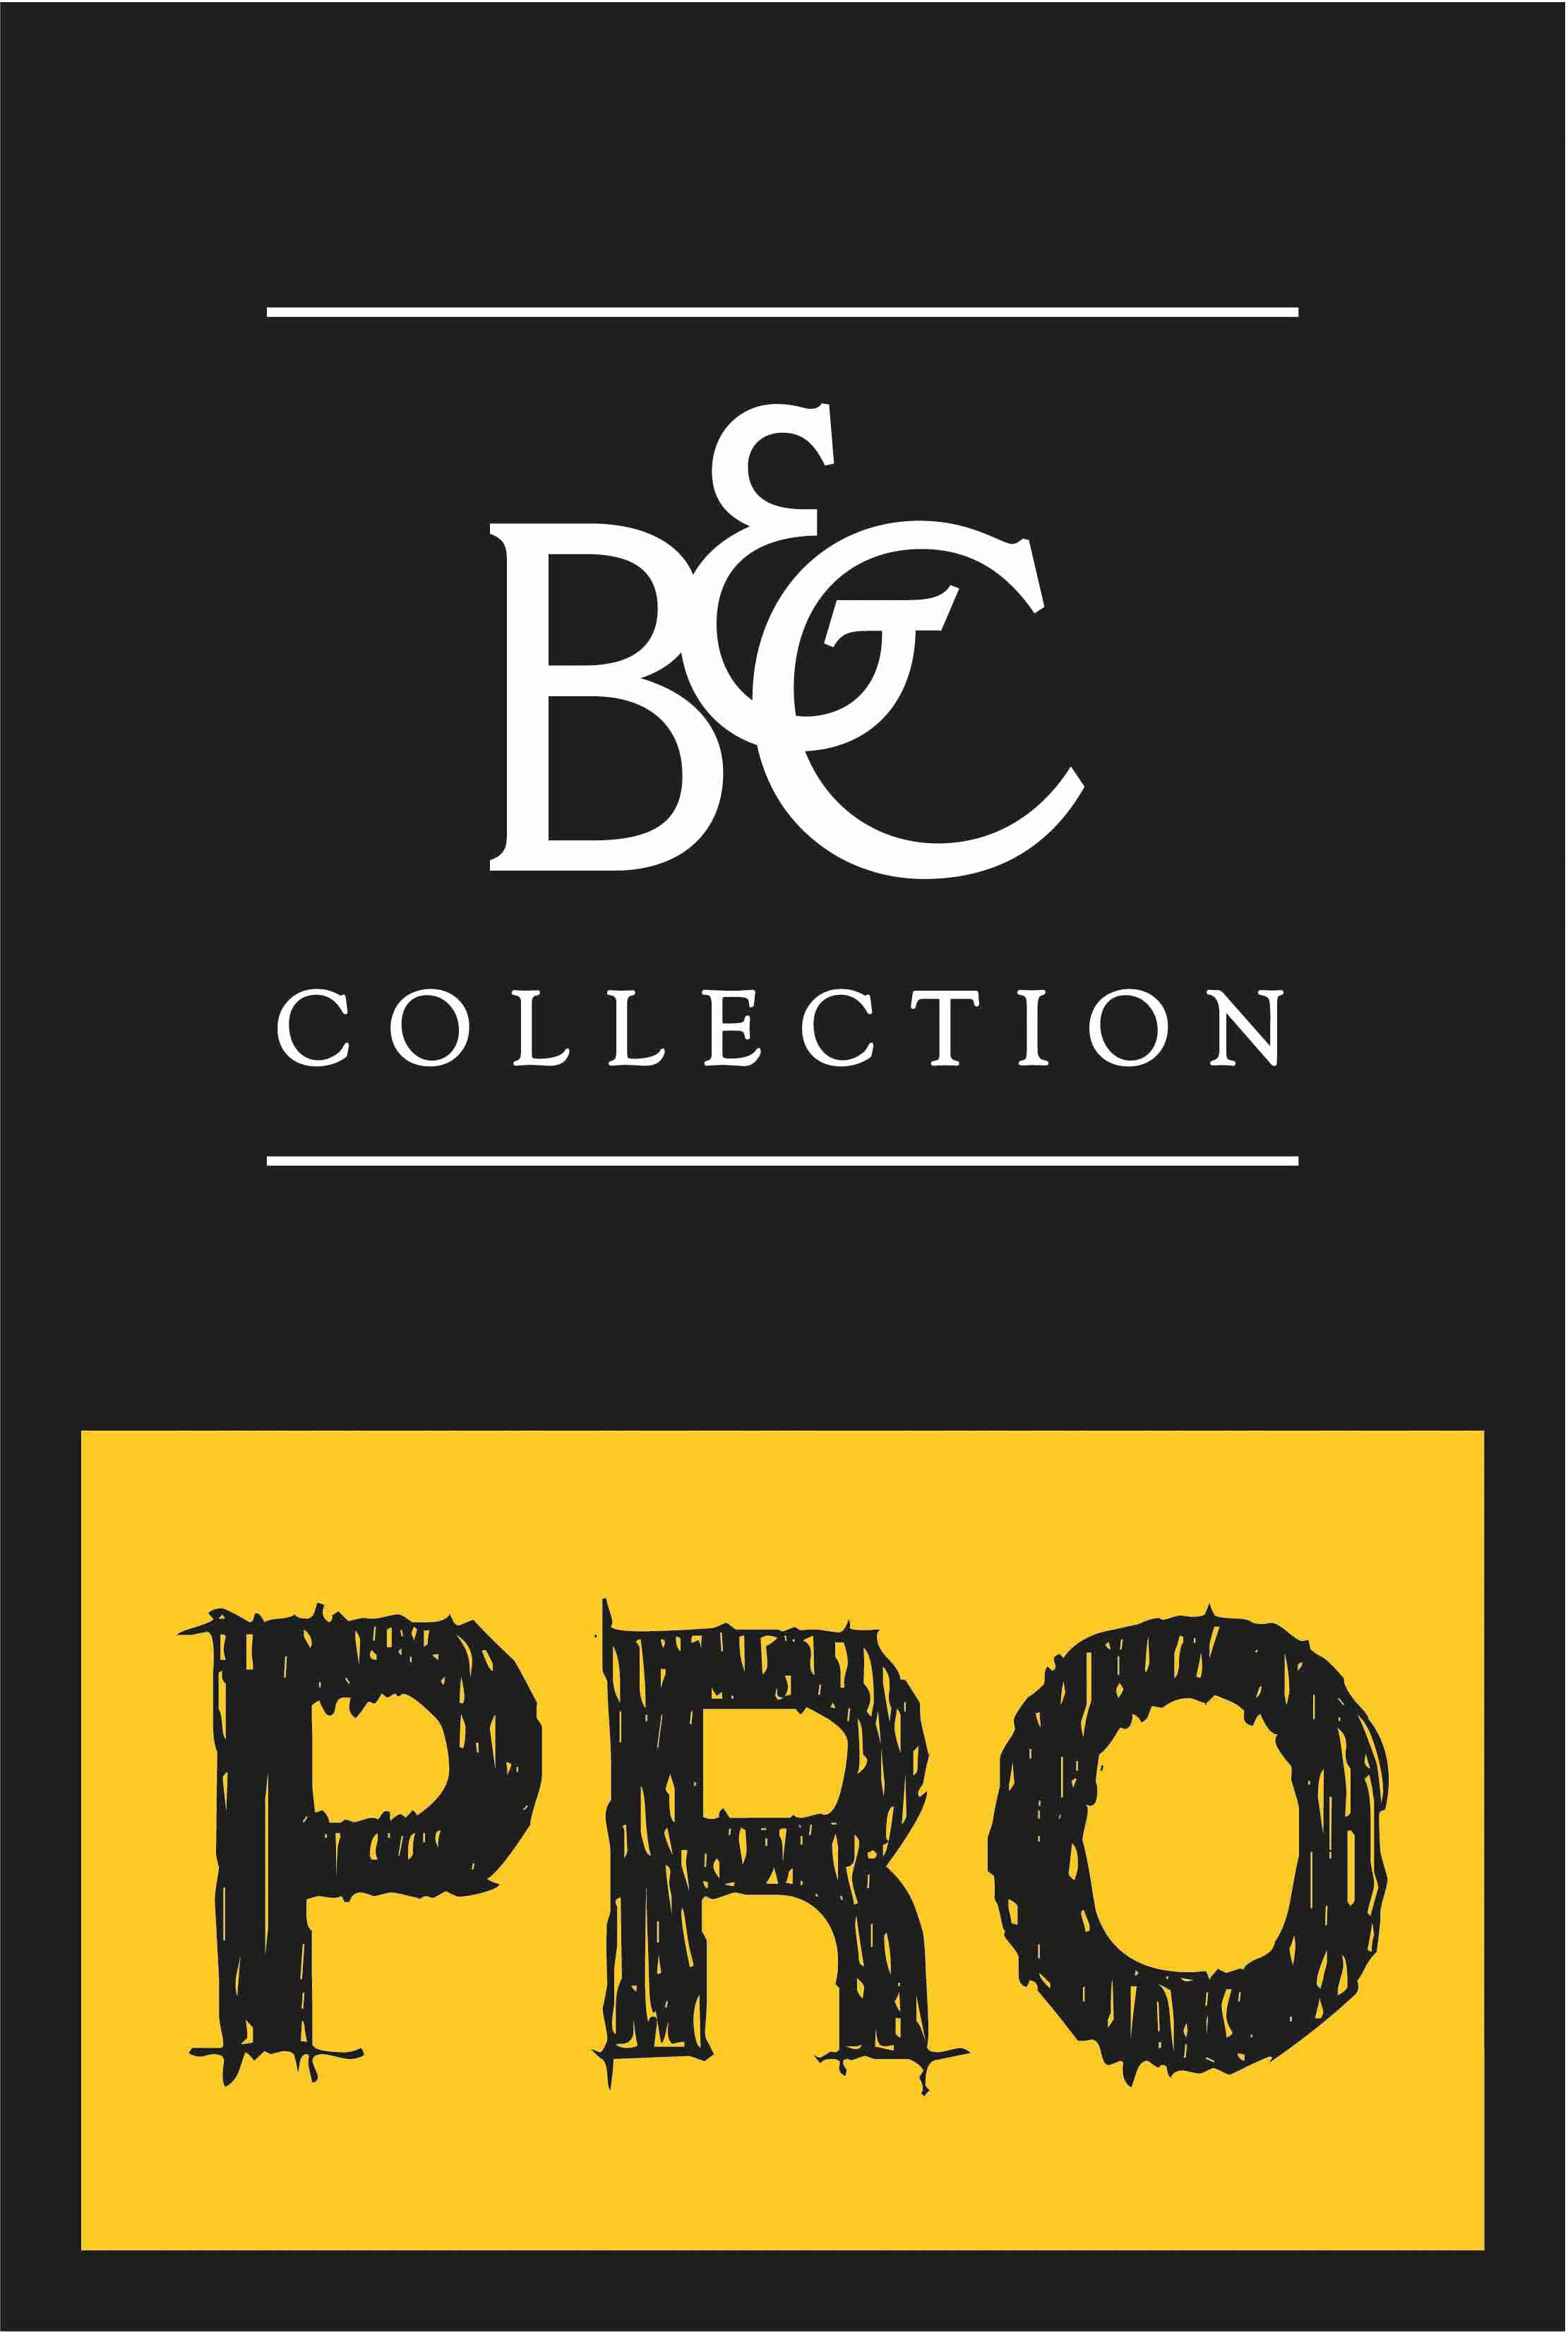 Perfect Pro Tee - BCTUC01 - B&C Pro Collection